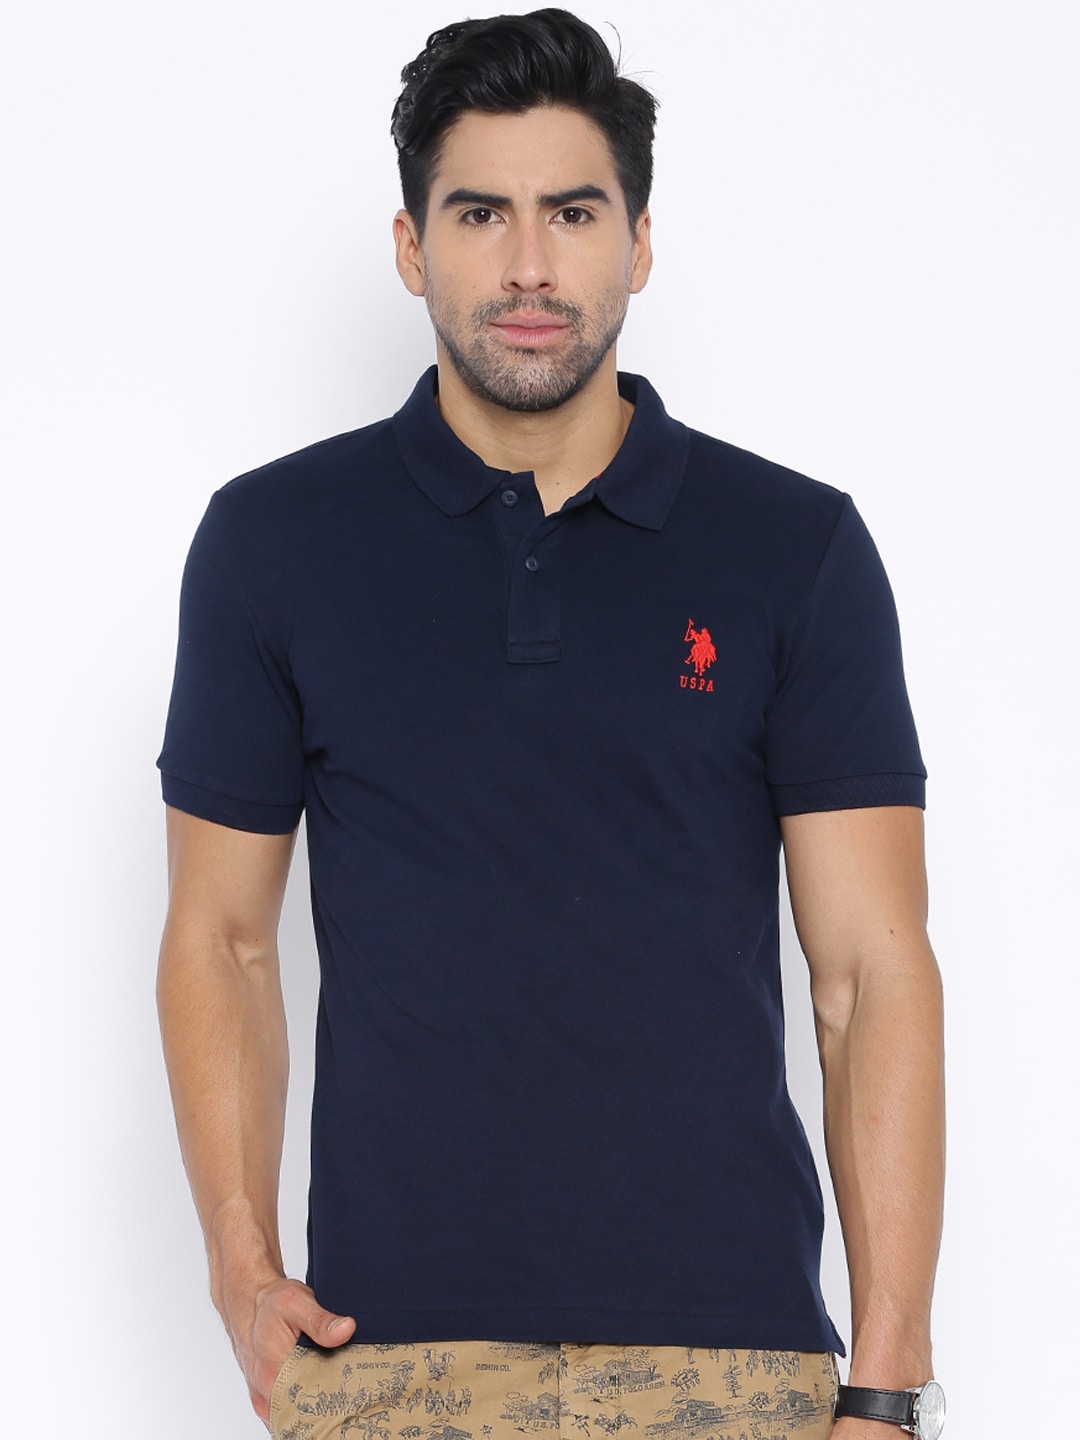 From the us polo assn polo t shirts online near